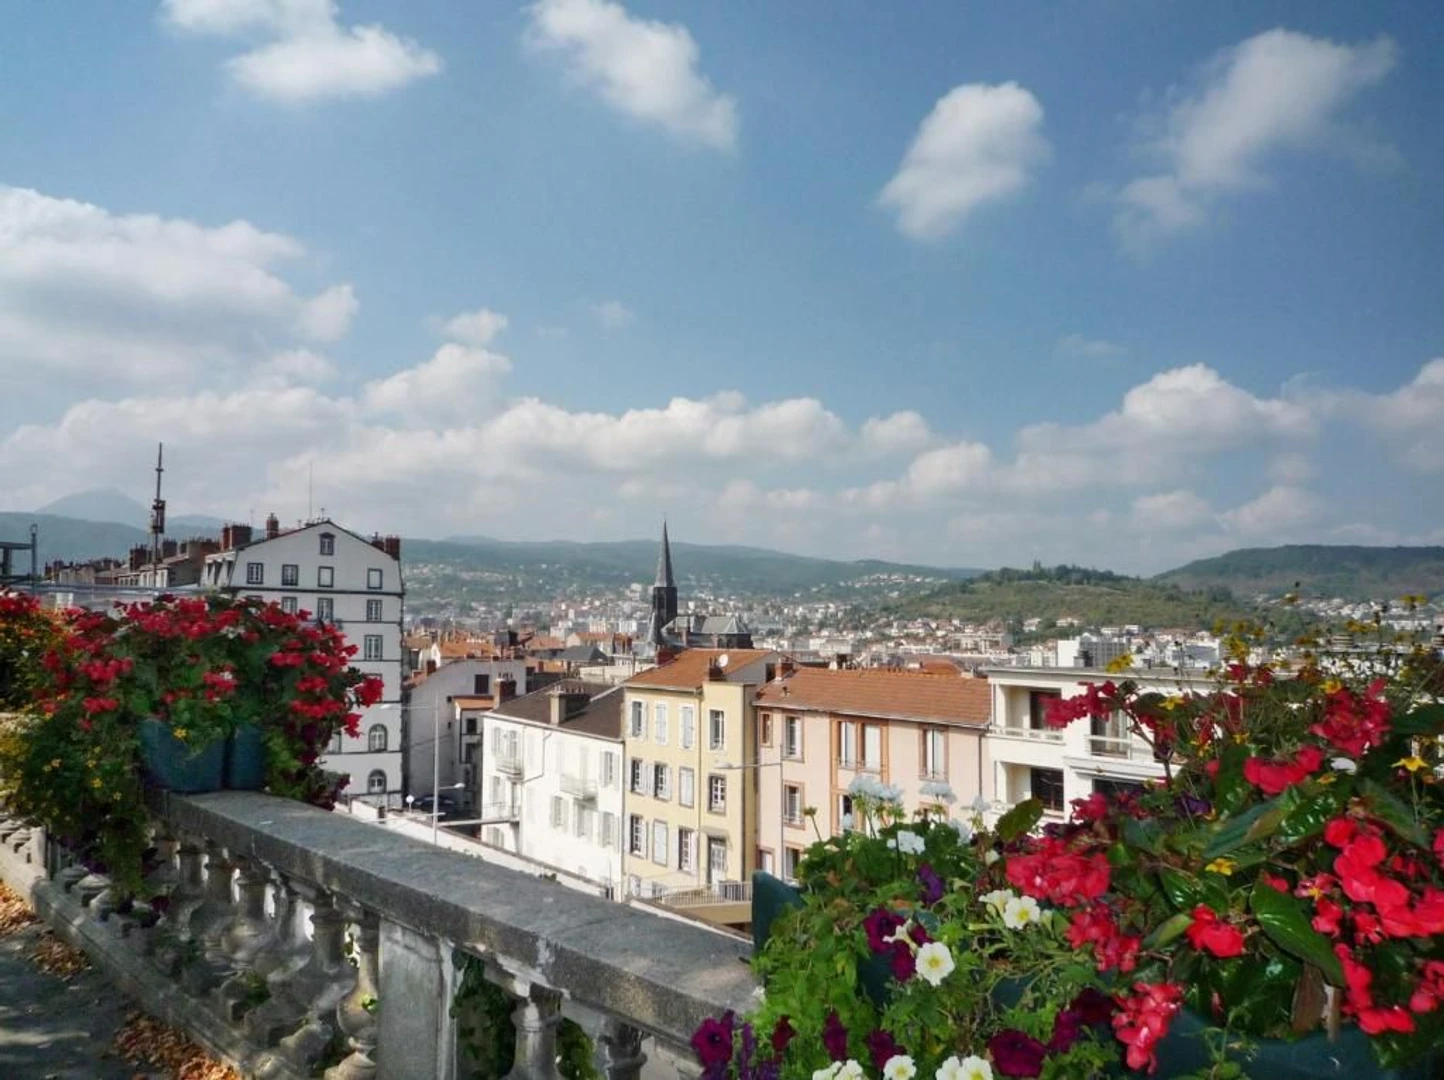 Renting rooms by the month in Clermont-ferrand